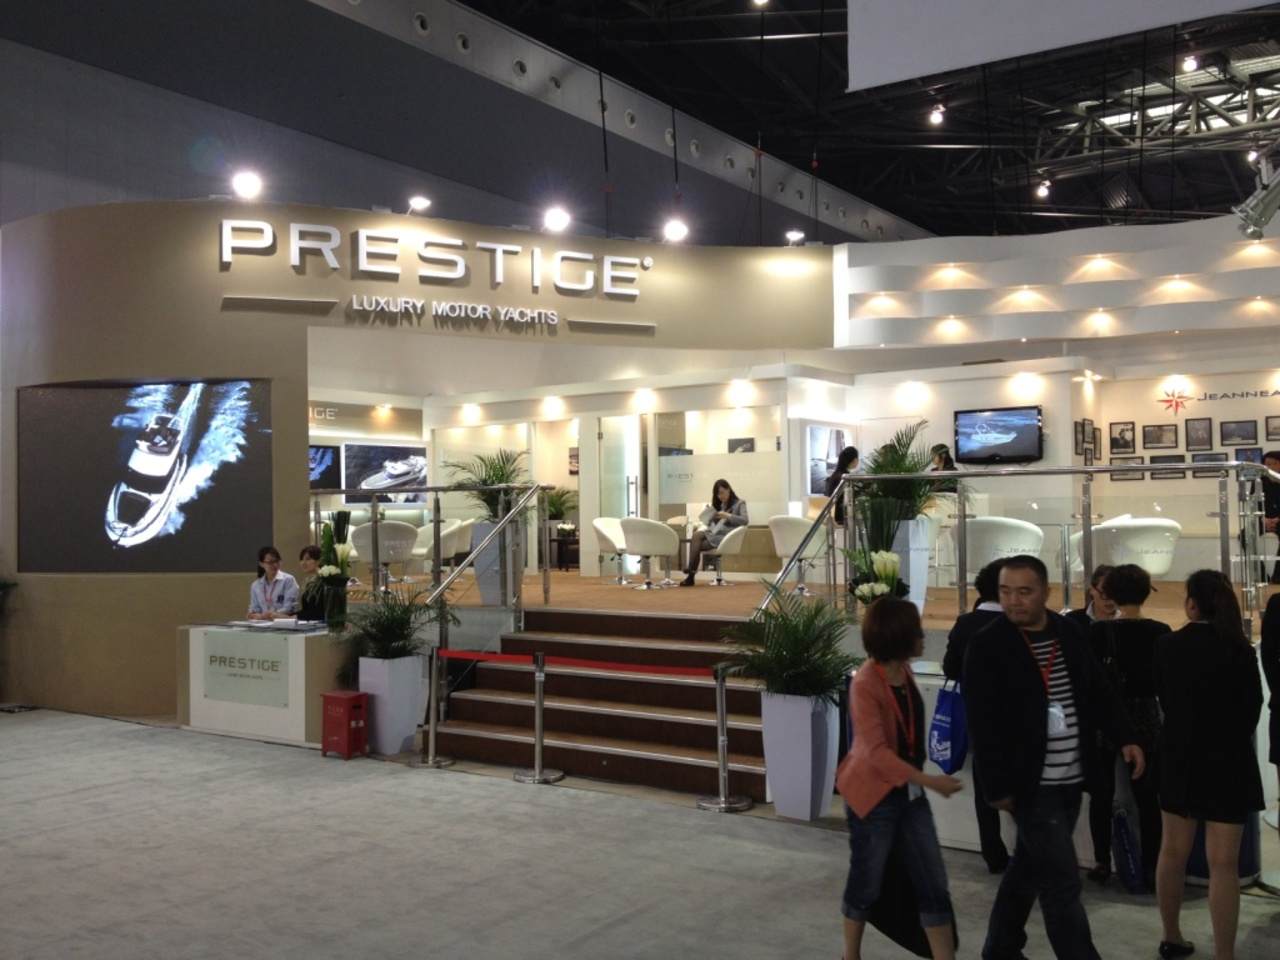 PRESTIGE AT THE SHANGHAI BOAT SHOW 2